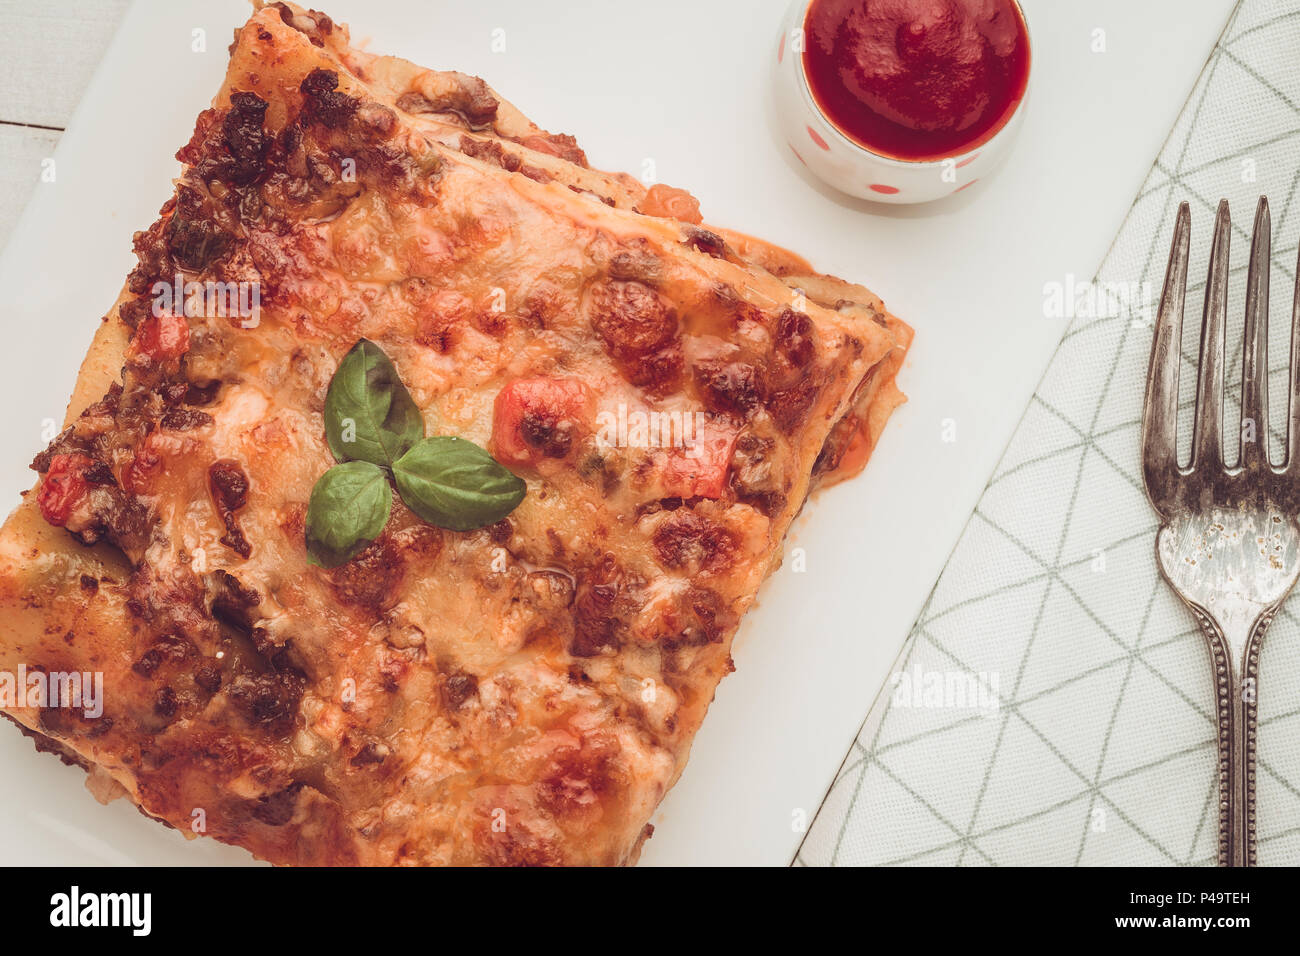 Homemade Lasagna with Minced Beef, Tomato Sauce and Fresh Basil on White Plate Stock Photo